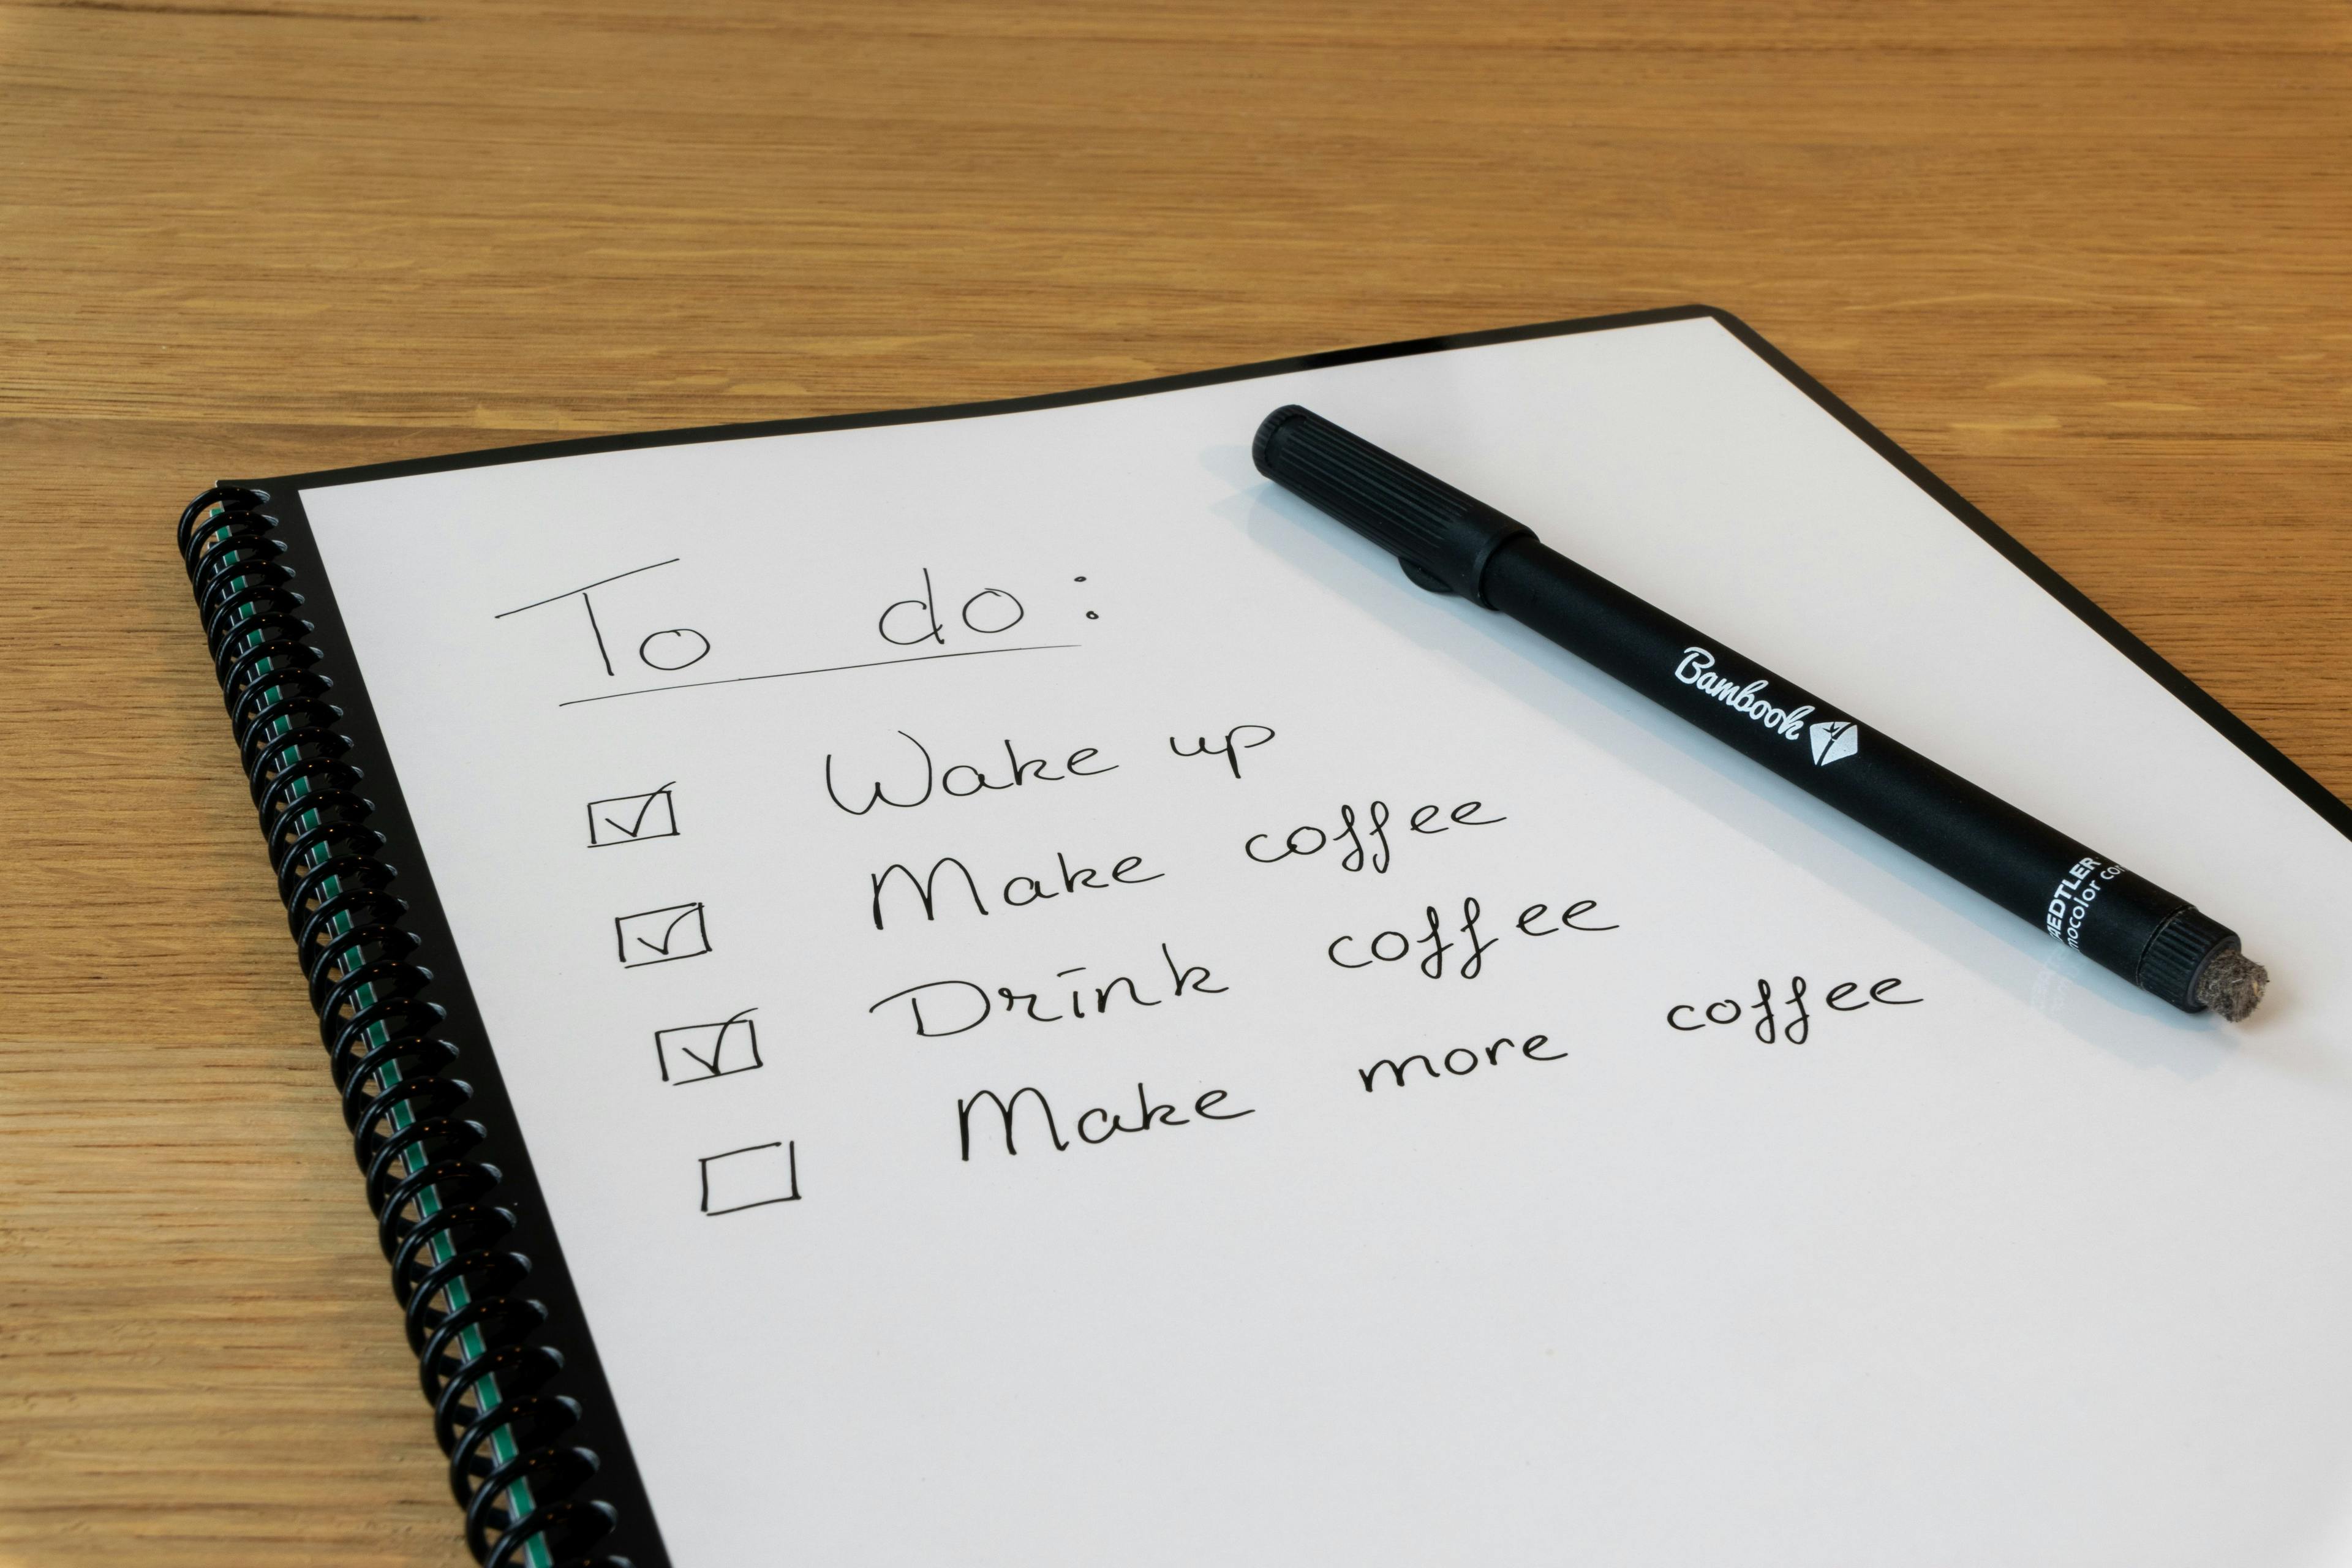 Why do you need this checklist?